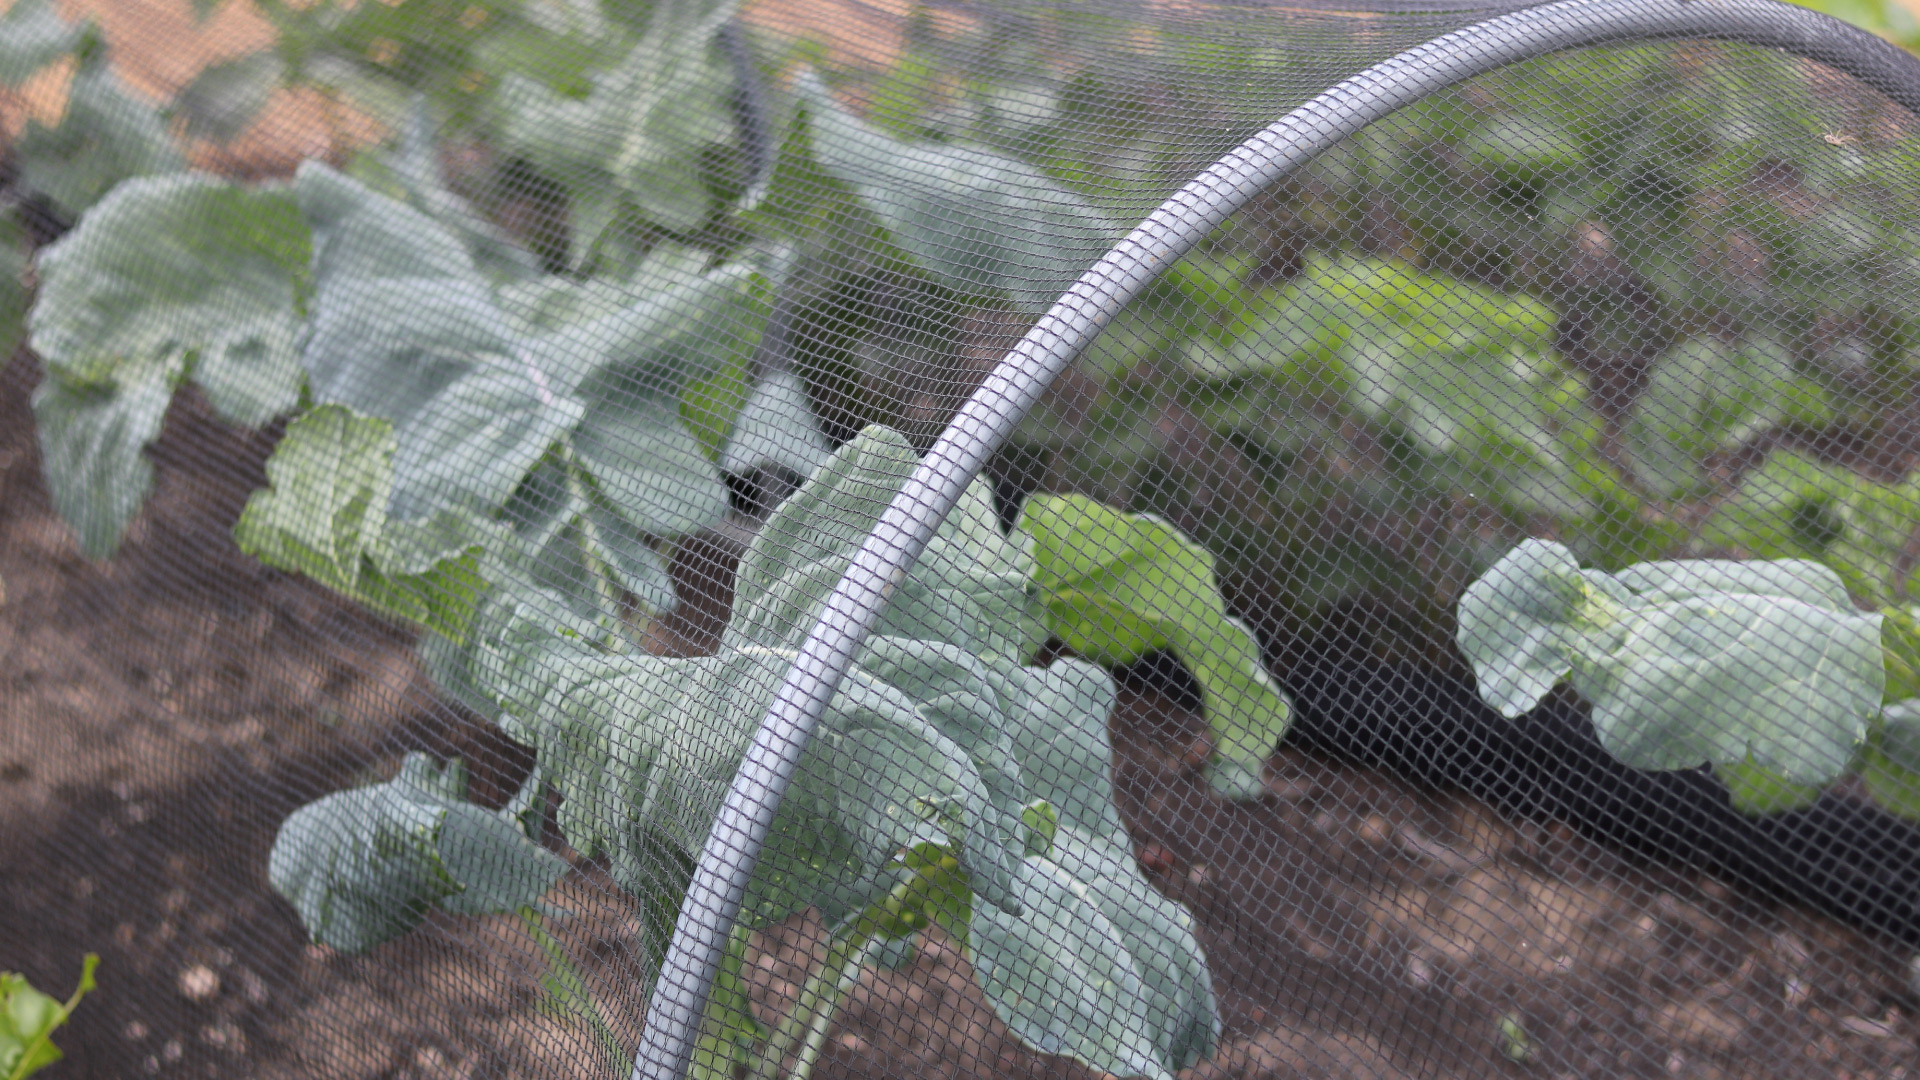 A cloche made from wire mesh and welded wire stops pests from nibbling newly planted spinach and other veggies.